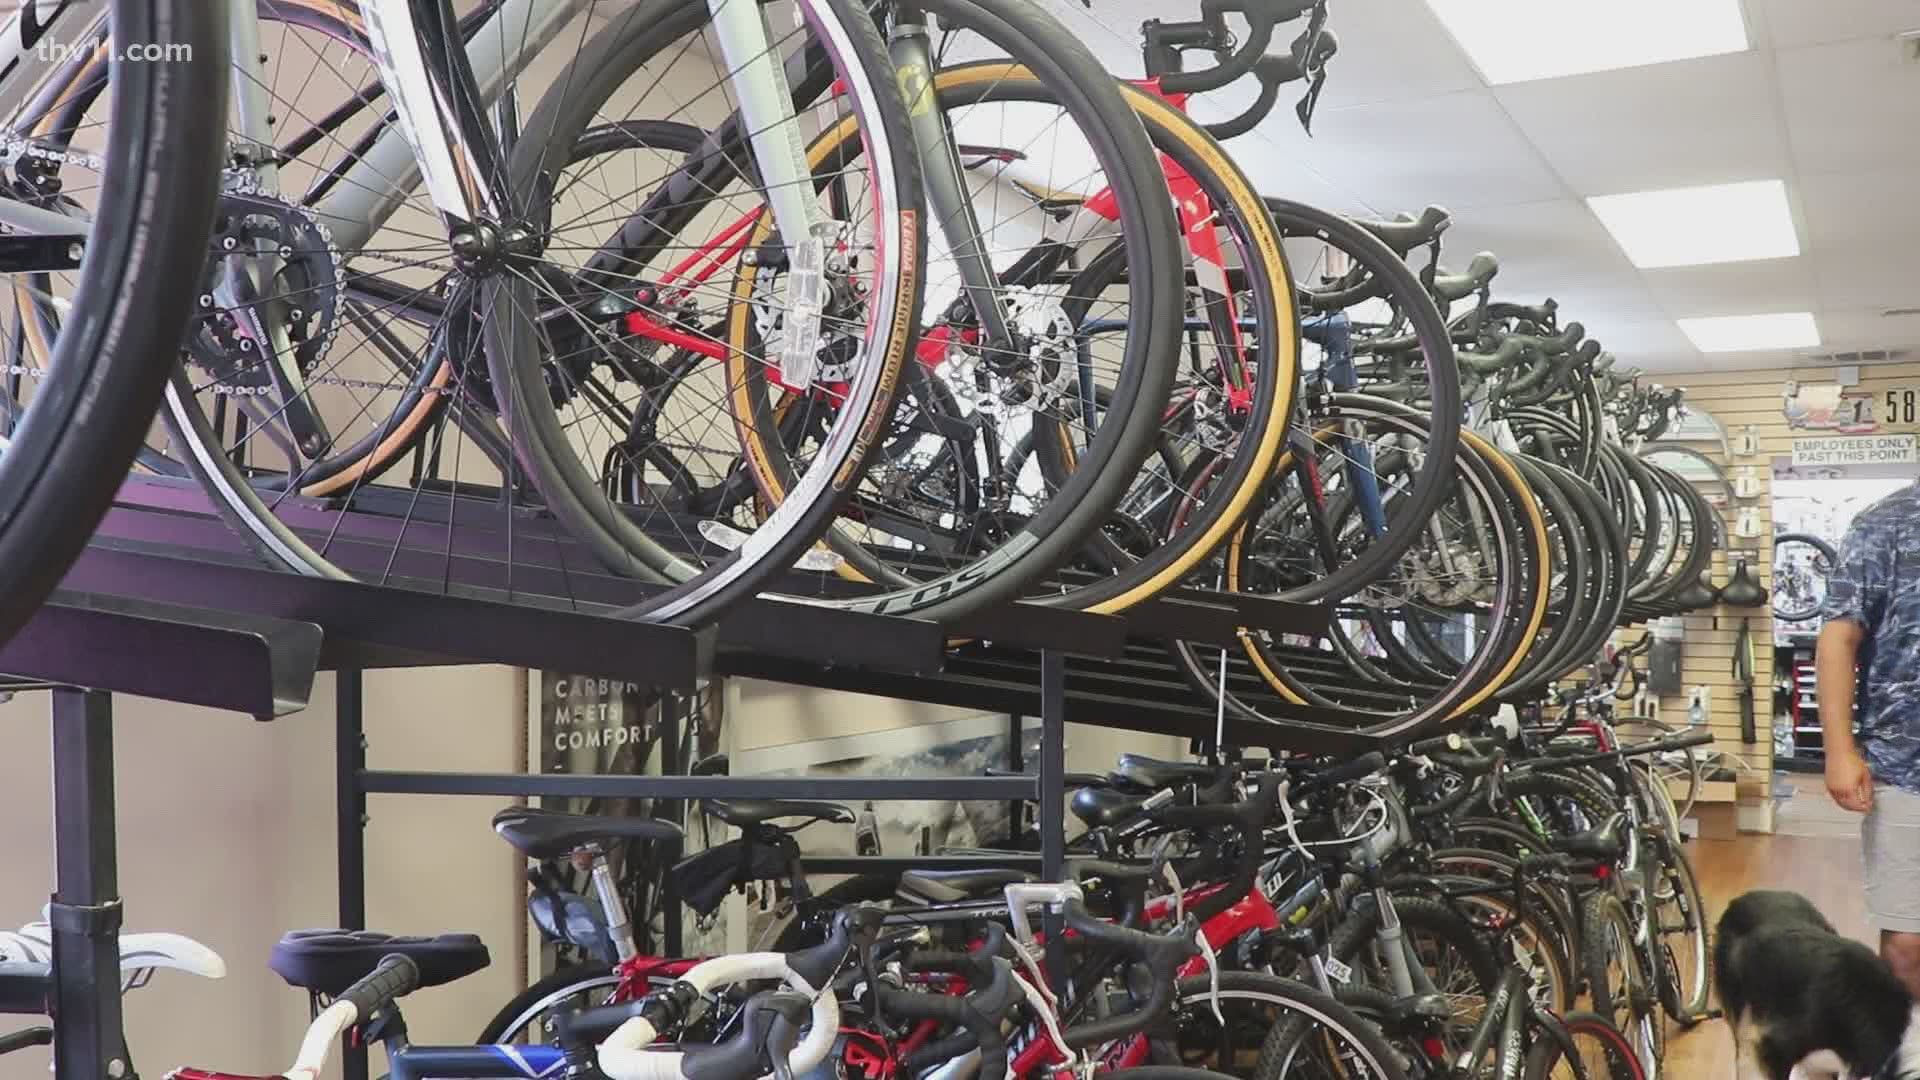 We've reported how bikes were becoming the new toilet paper with bicycle stores seeing sales unlike ever before. For one shop, the overwhelming demand has continued.